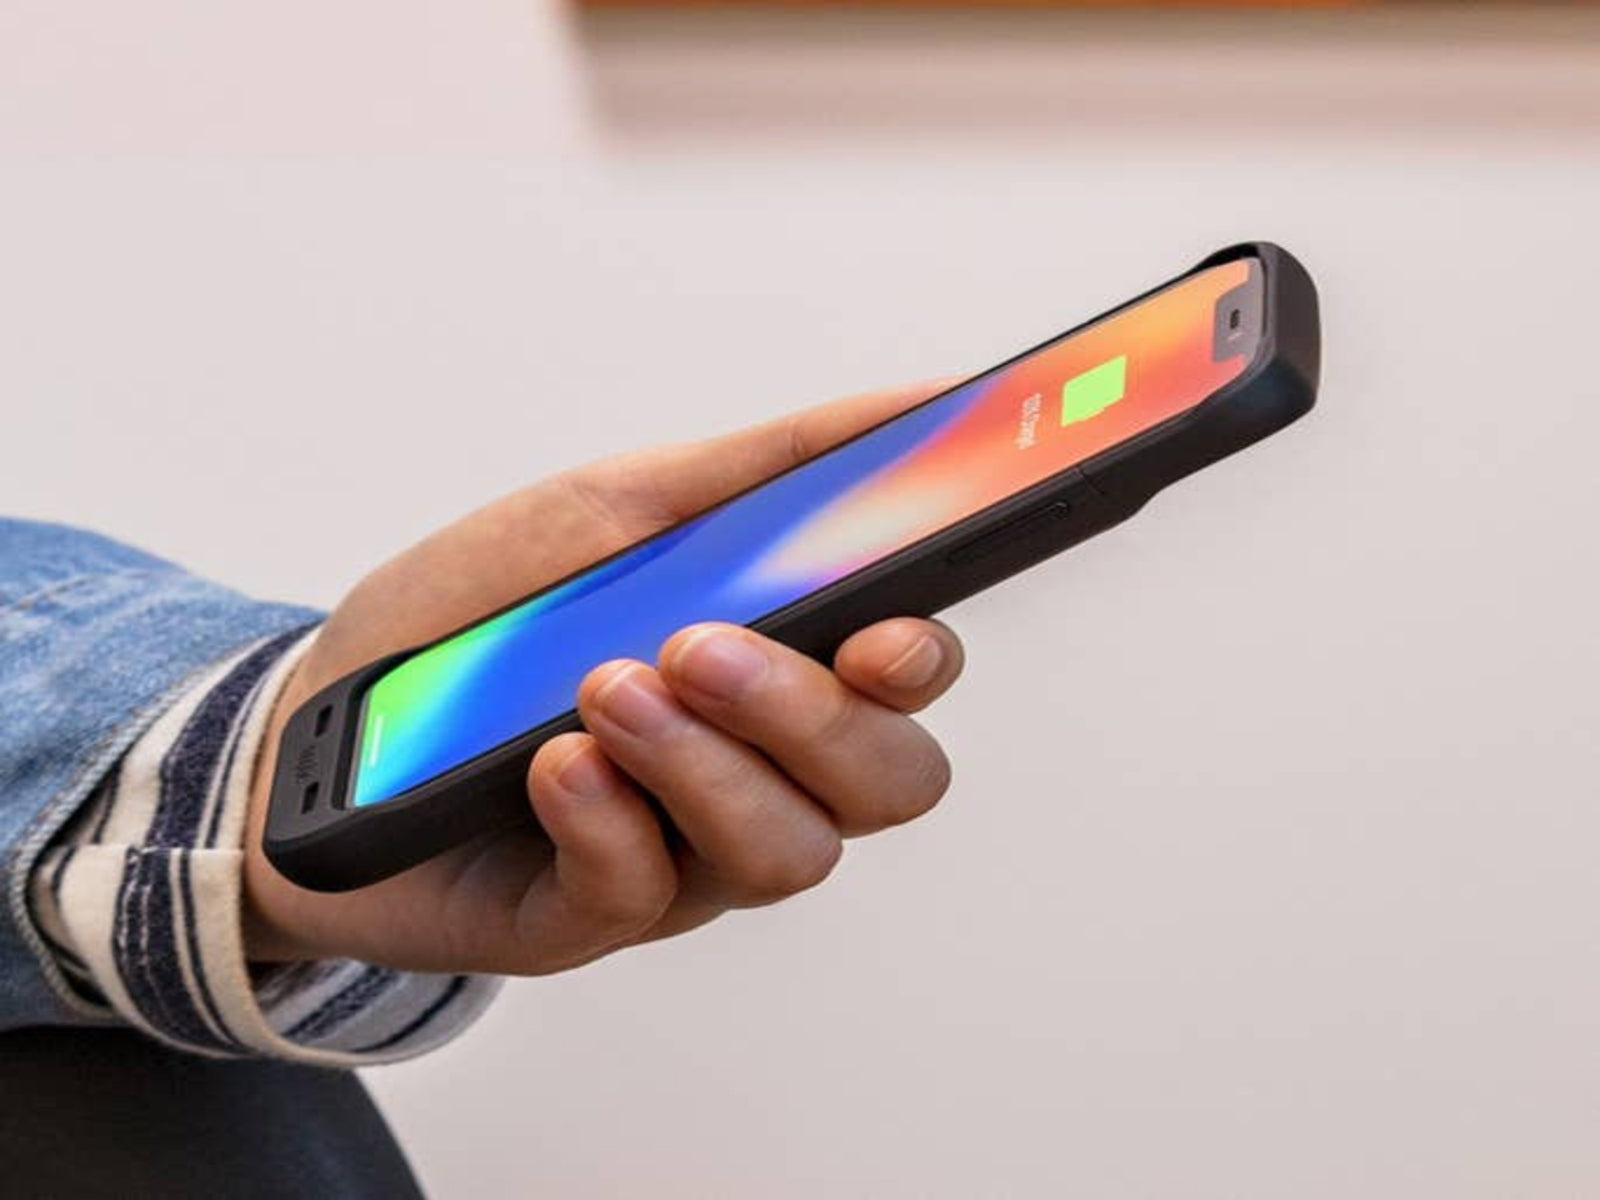 Mophie Battery Case for Apple iPhone XS & iPhone X Being USed